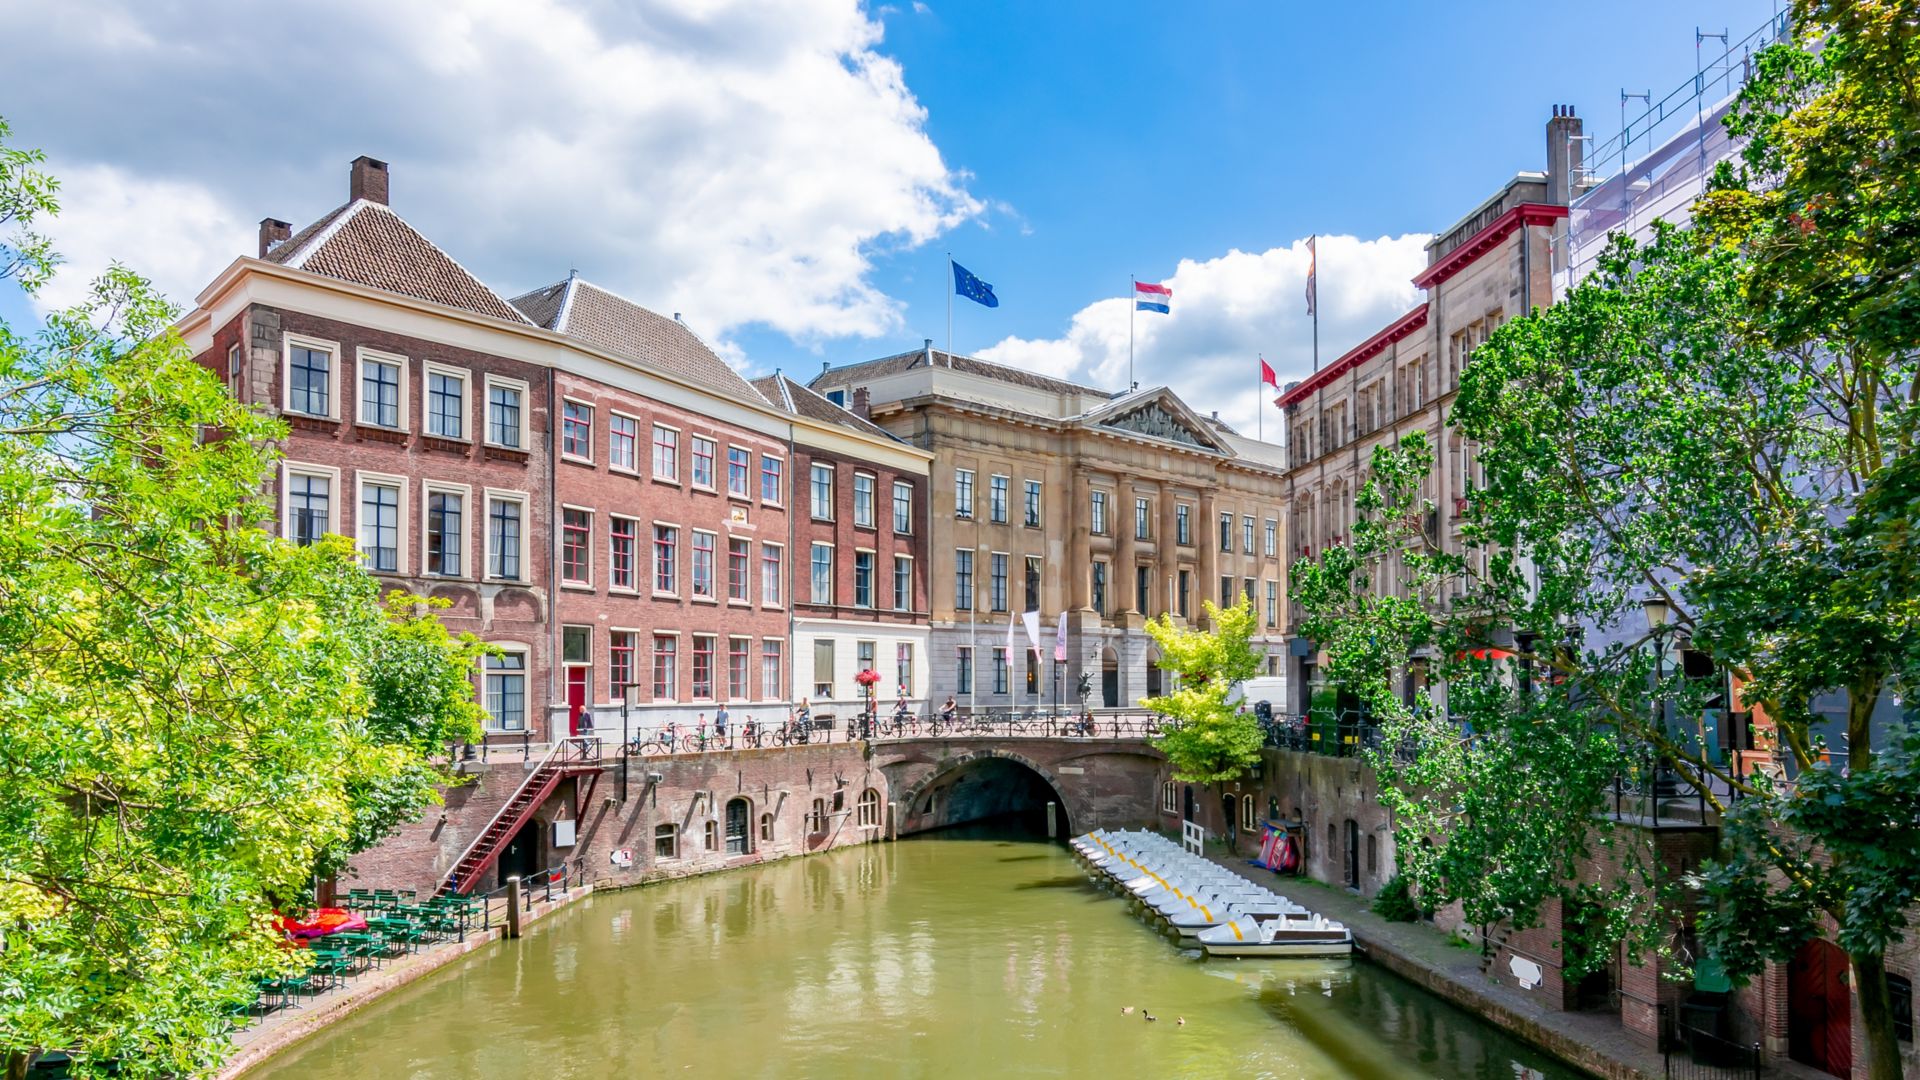 Utrecht architecture and two-level canals in summer, Netherlands